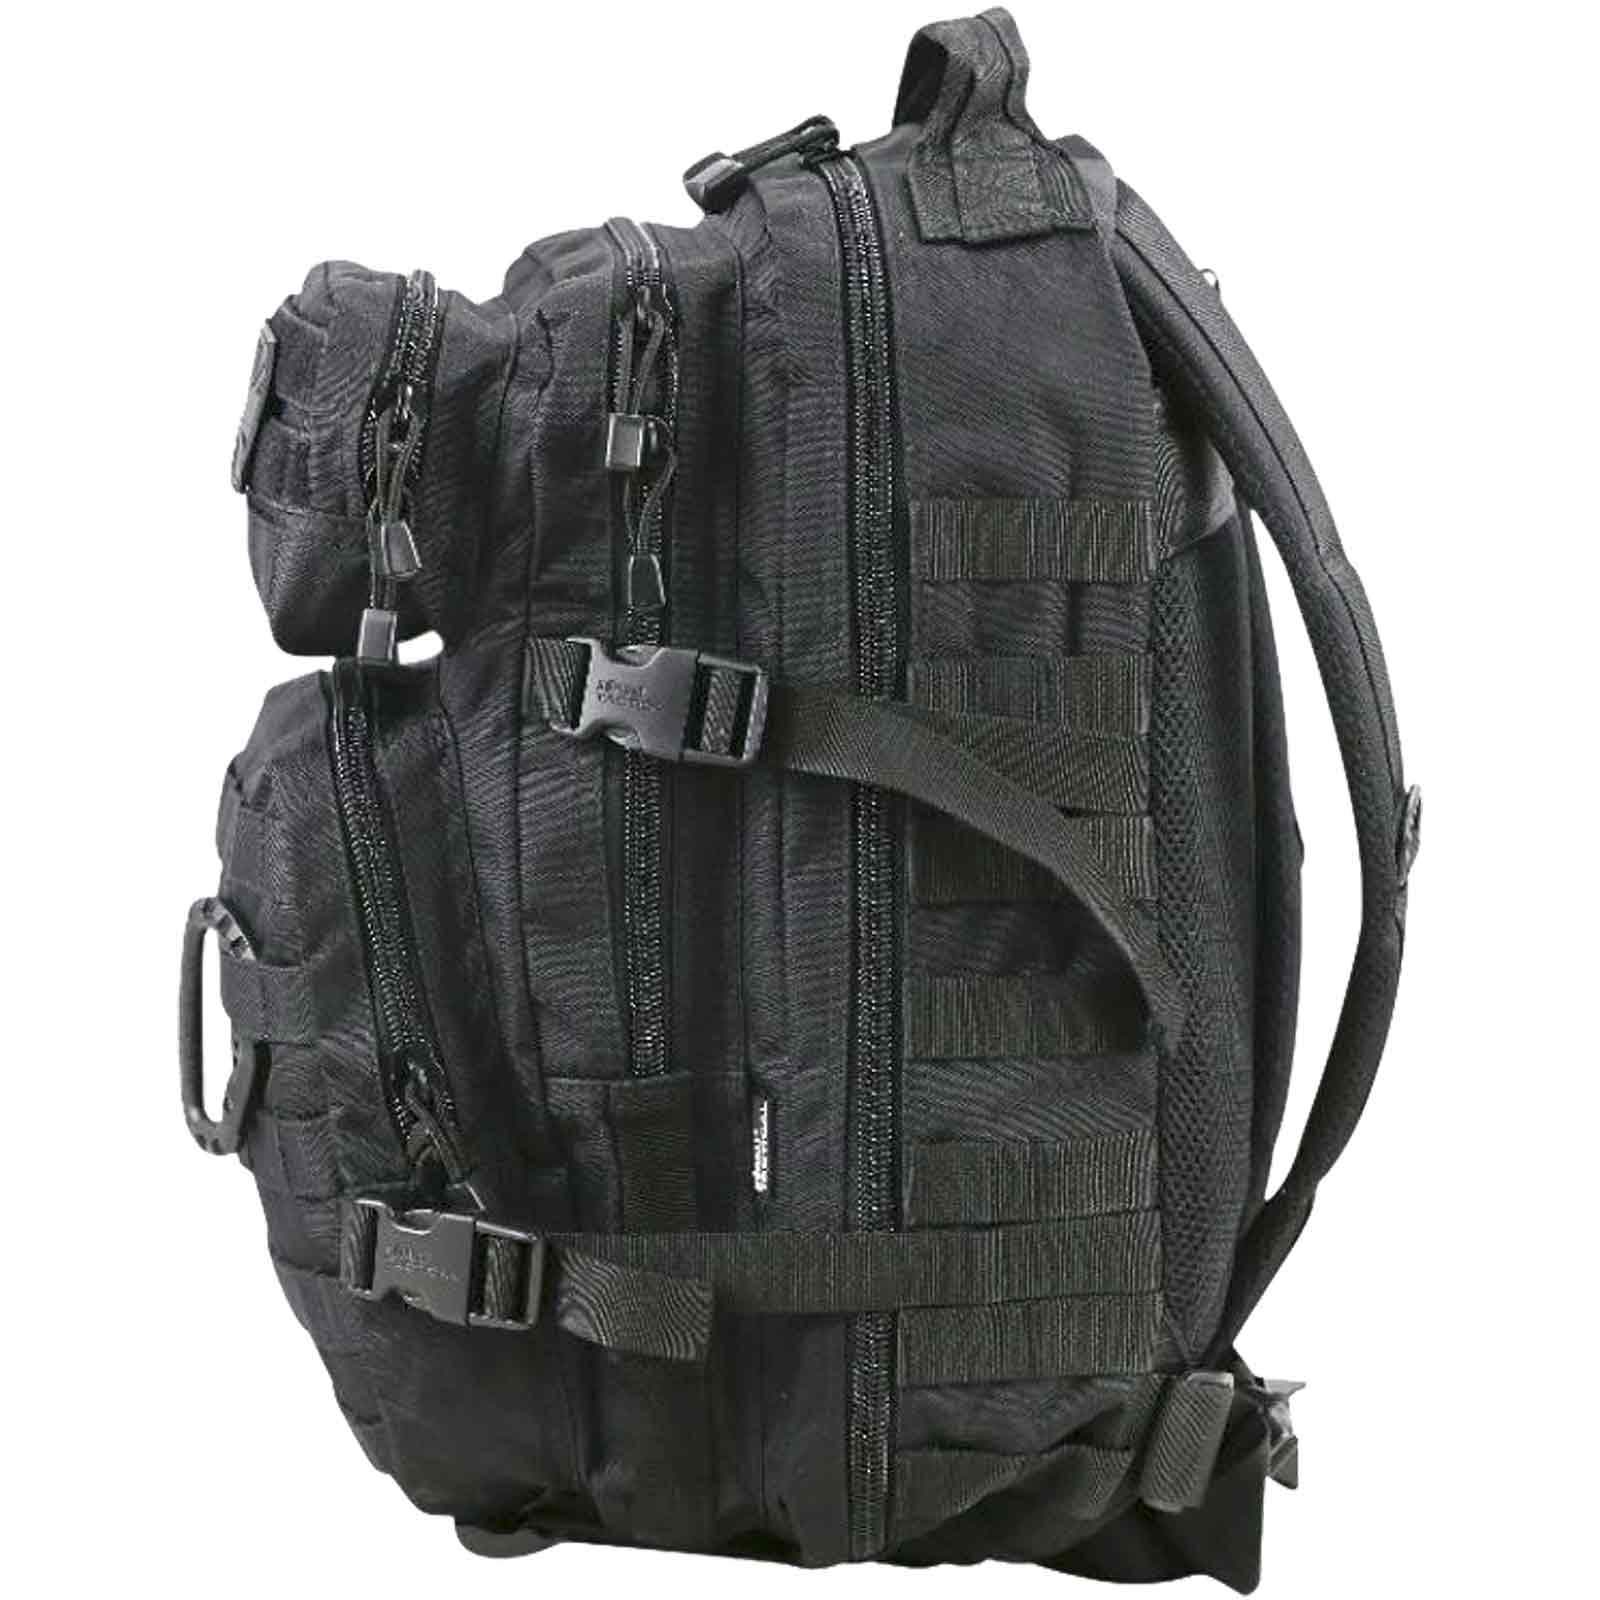 Kombat MOLLE Assault Pack 28L Army Tactical Recon Backpack Military ...